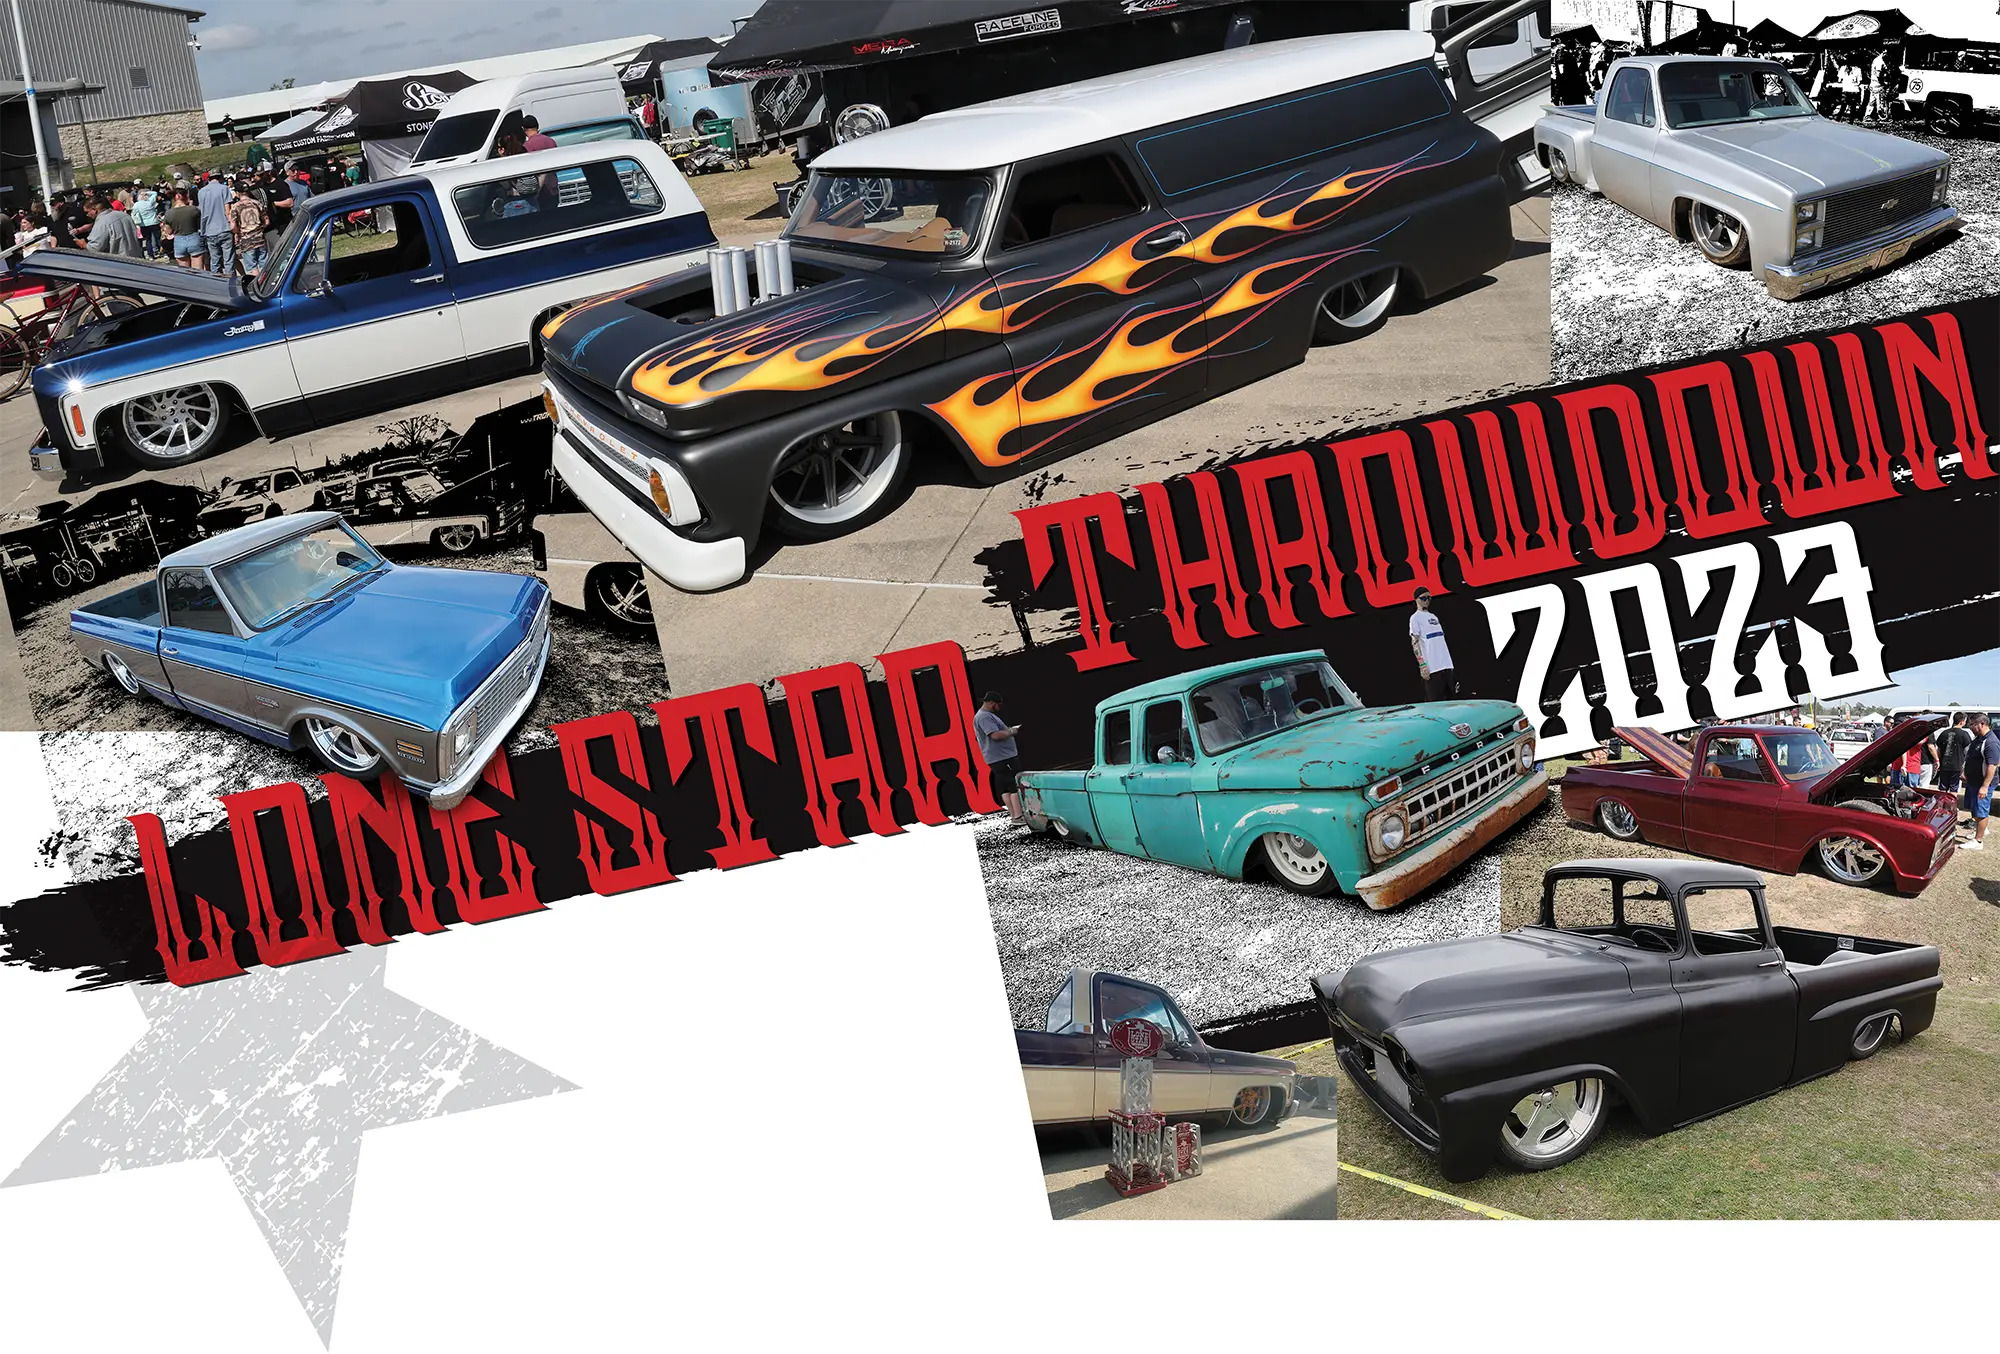 Lone Star Throwdown 2023 title with a collage of trucks from a show